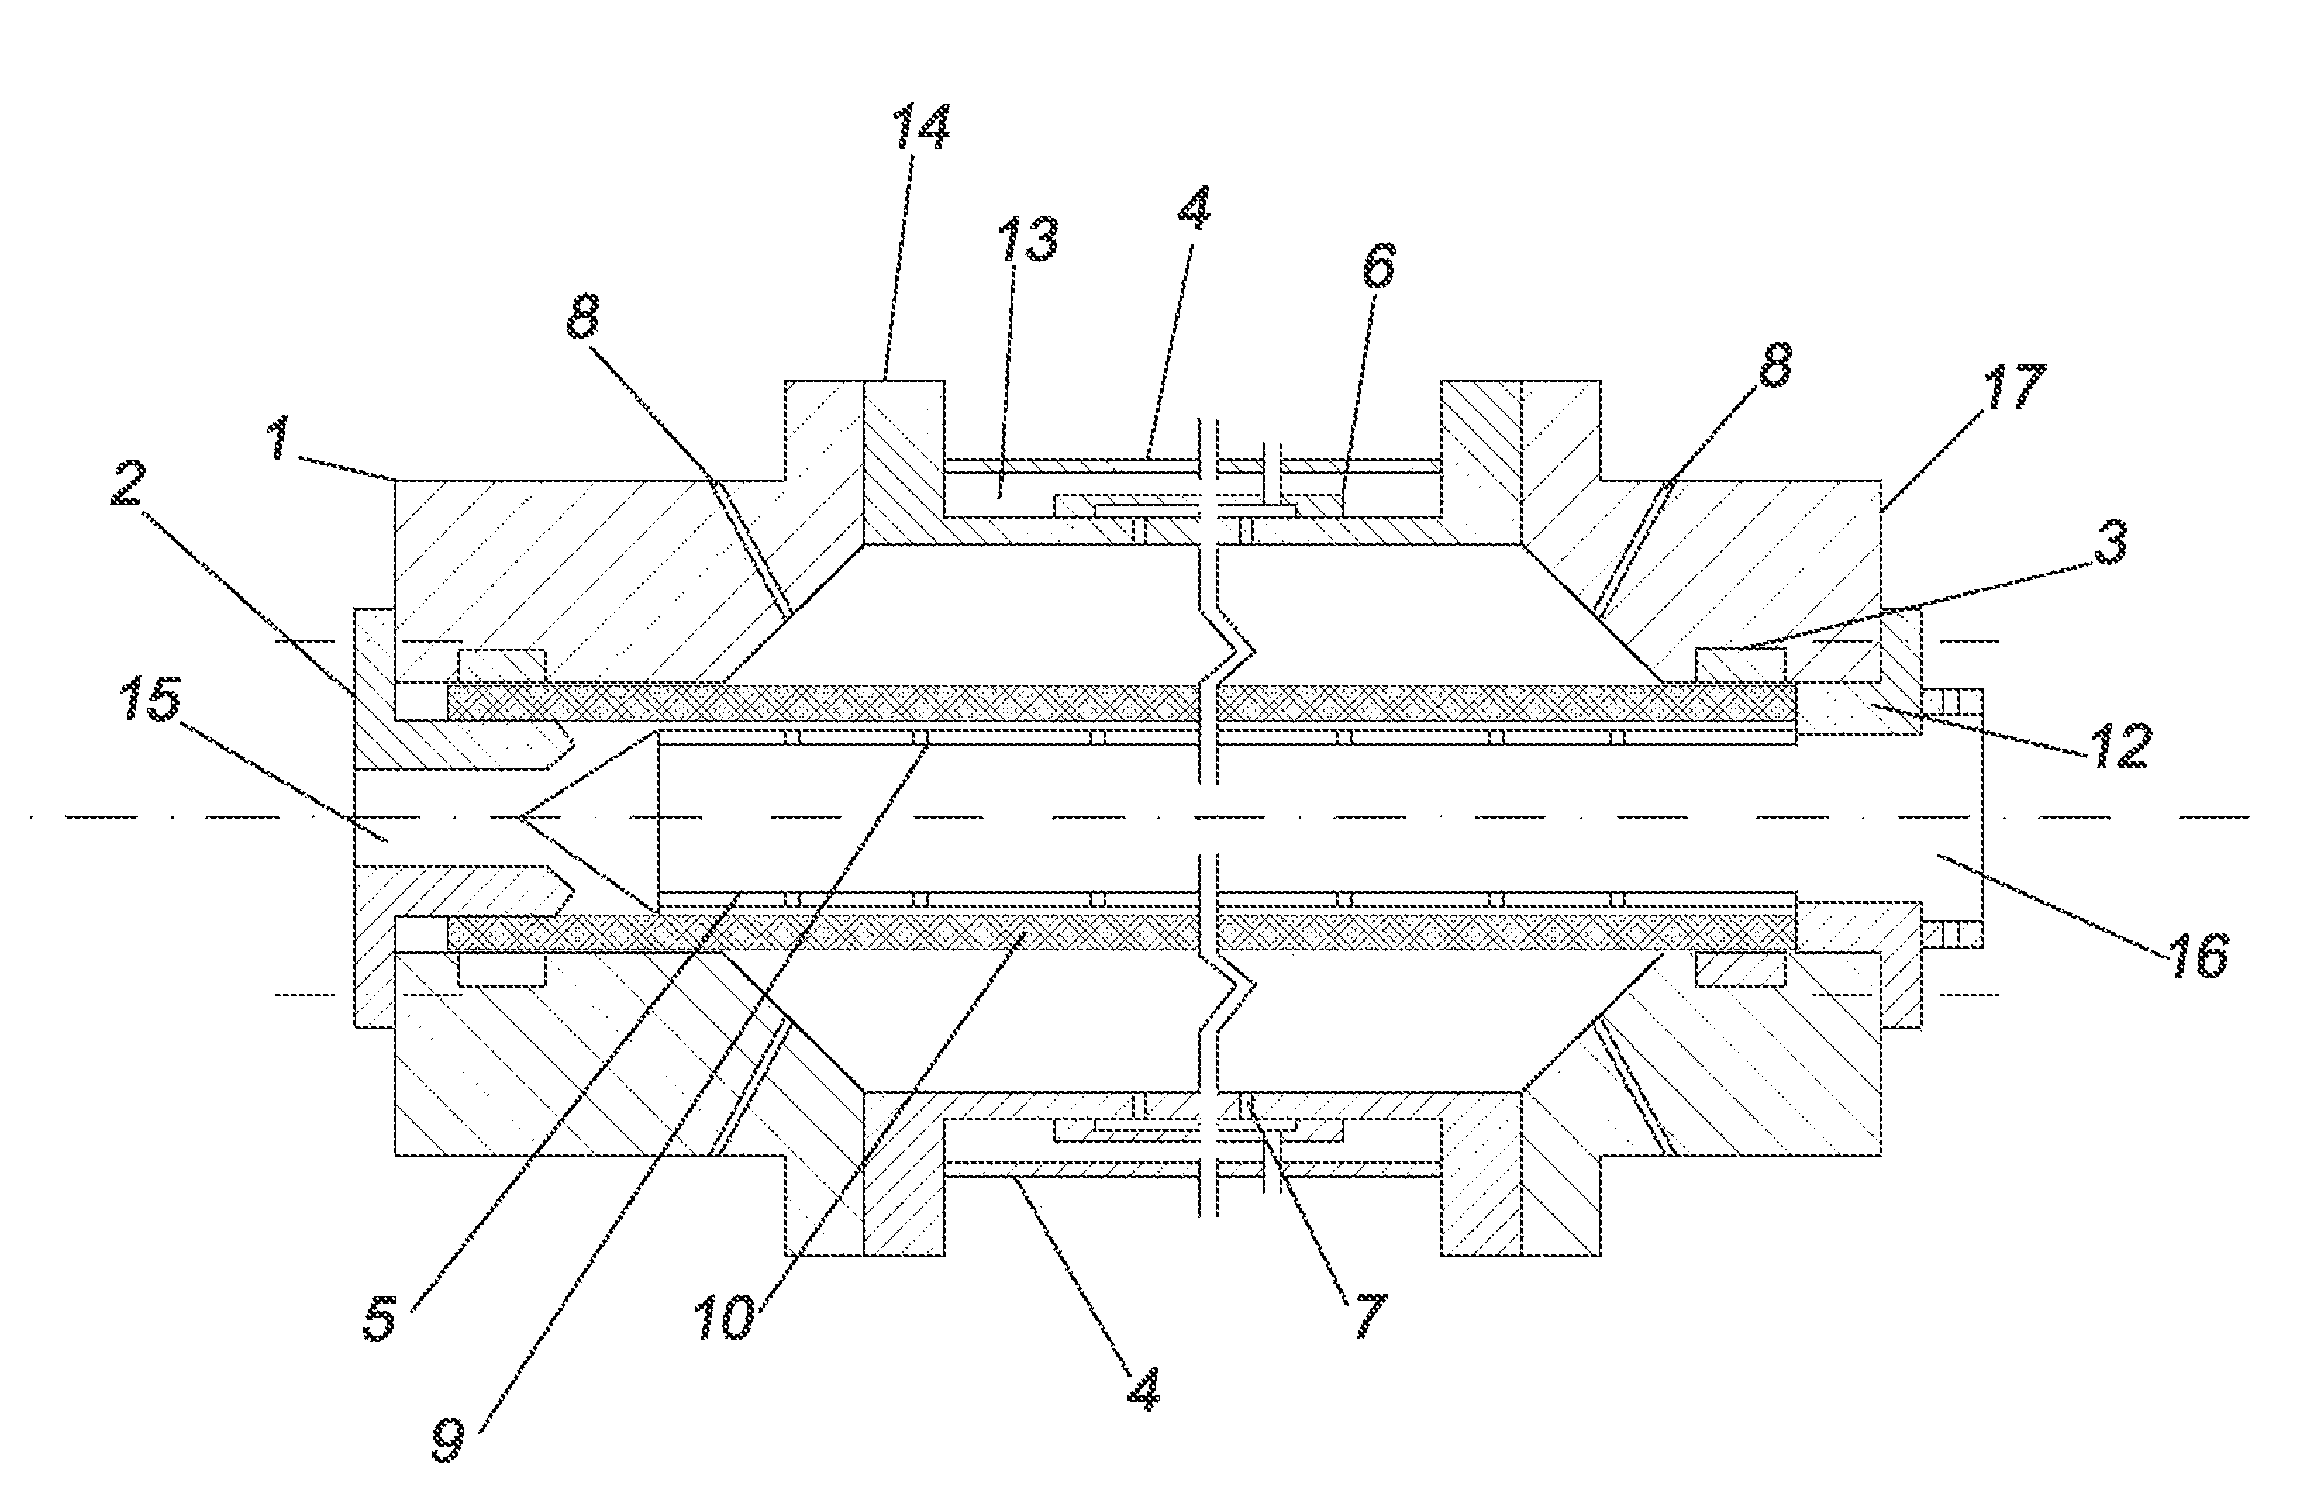 Equipment and method for production of tubes of molecularly bidirected plastic